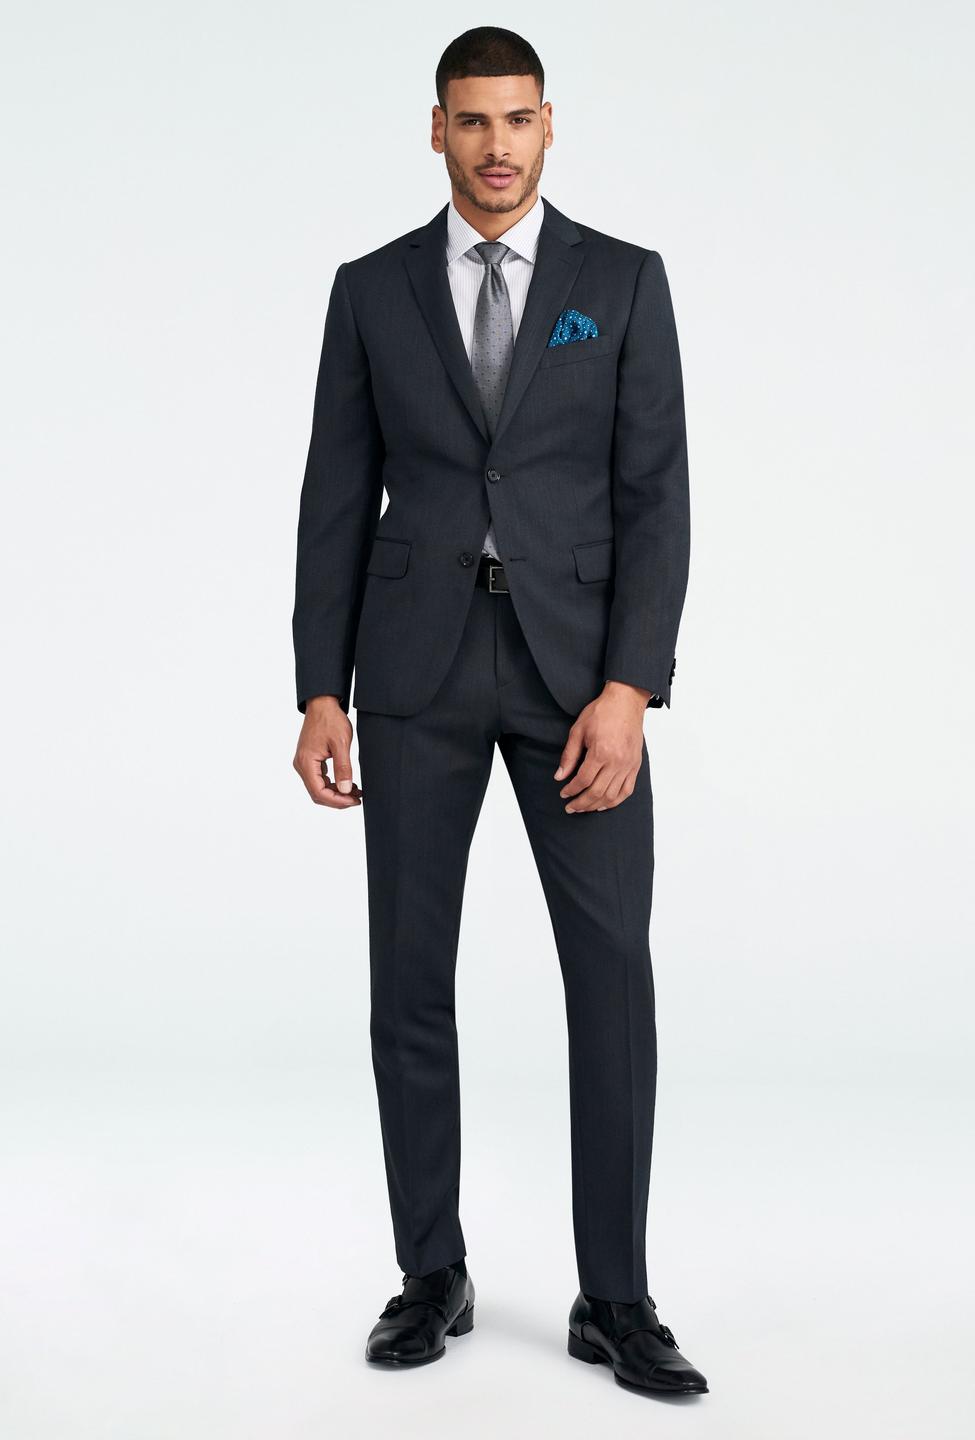 Hereford Cavalry Twill Charcoal Suit